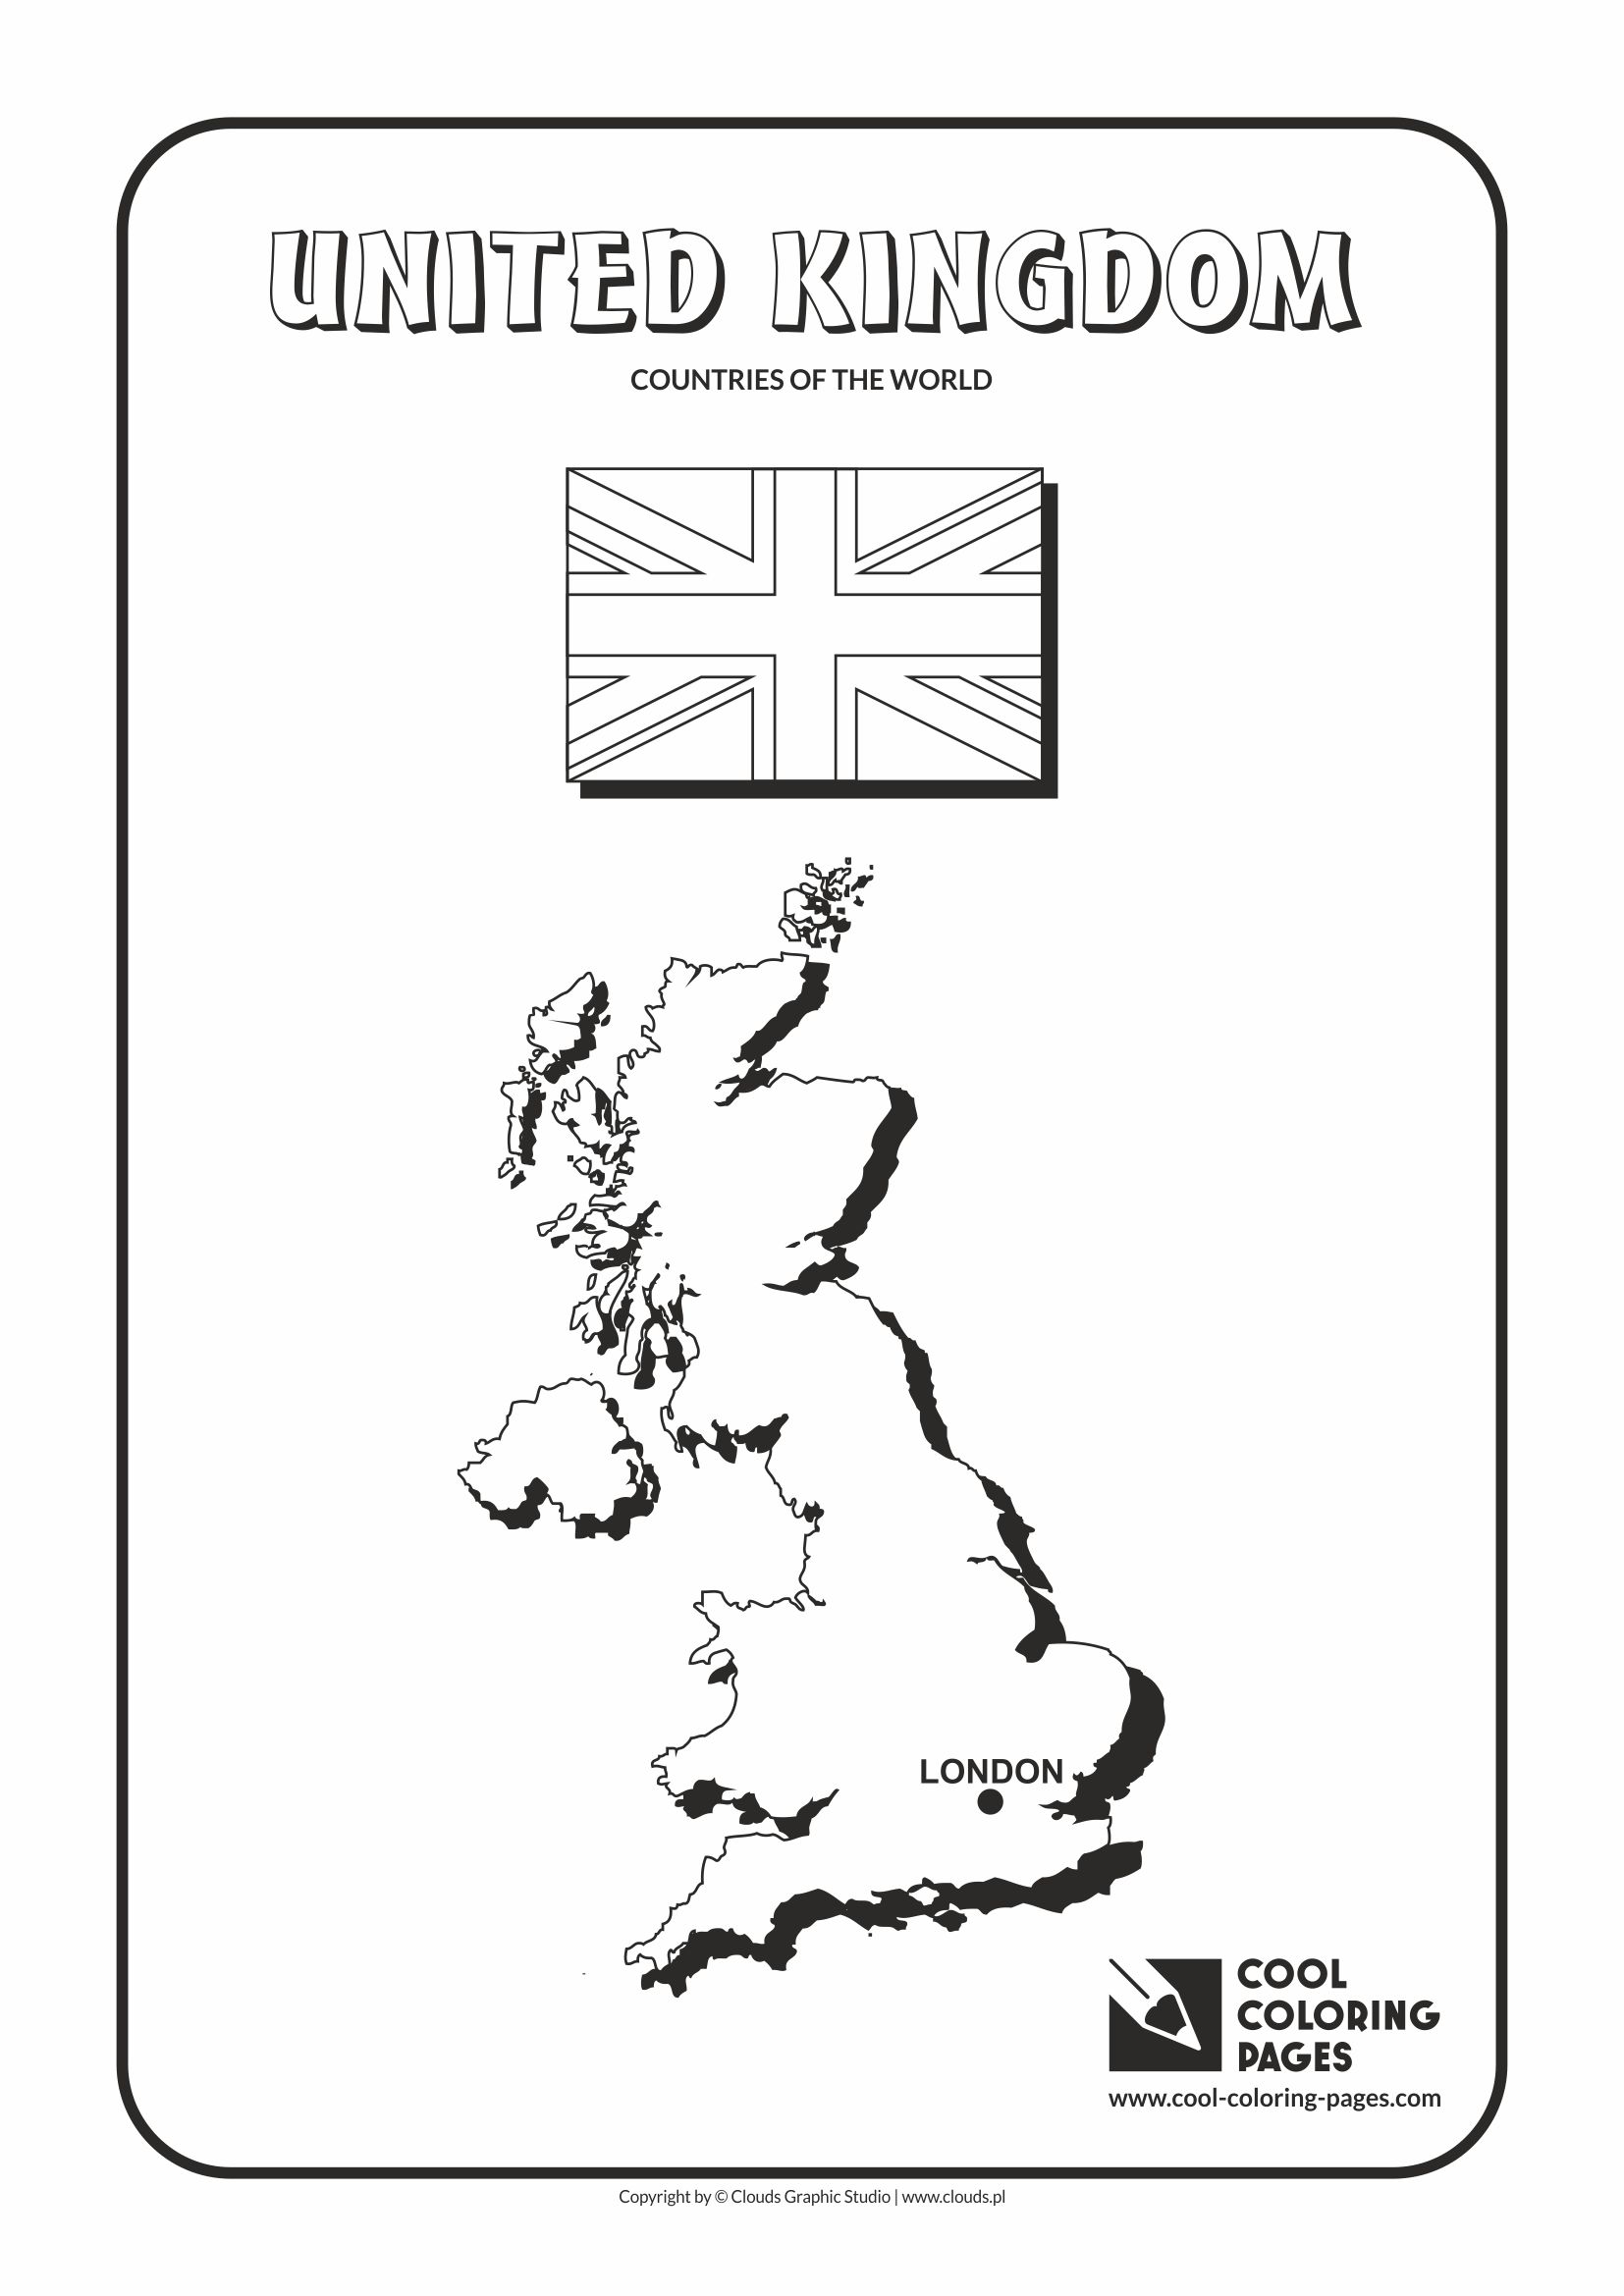 Cool Coloring Pages - Countries of the world / United Kingdom